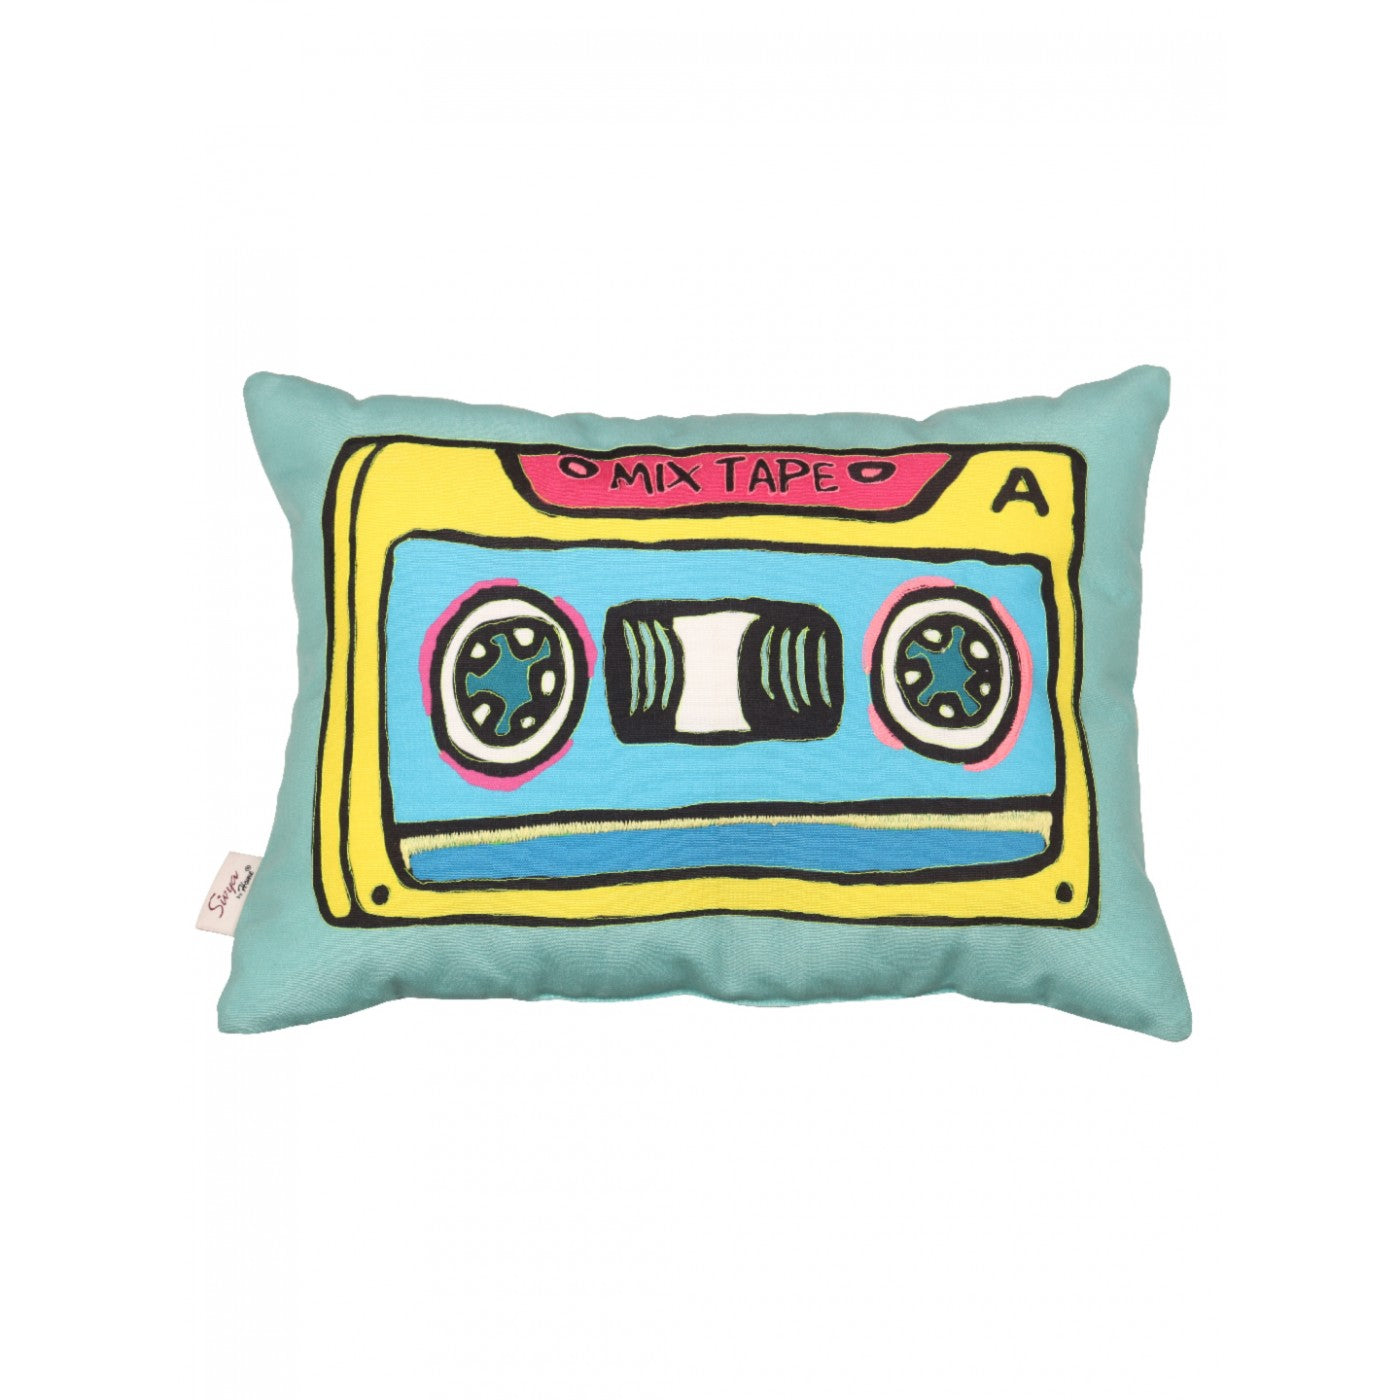 Mixtape-Inspired Stuffed Cushion with Intricate Embroider